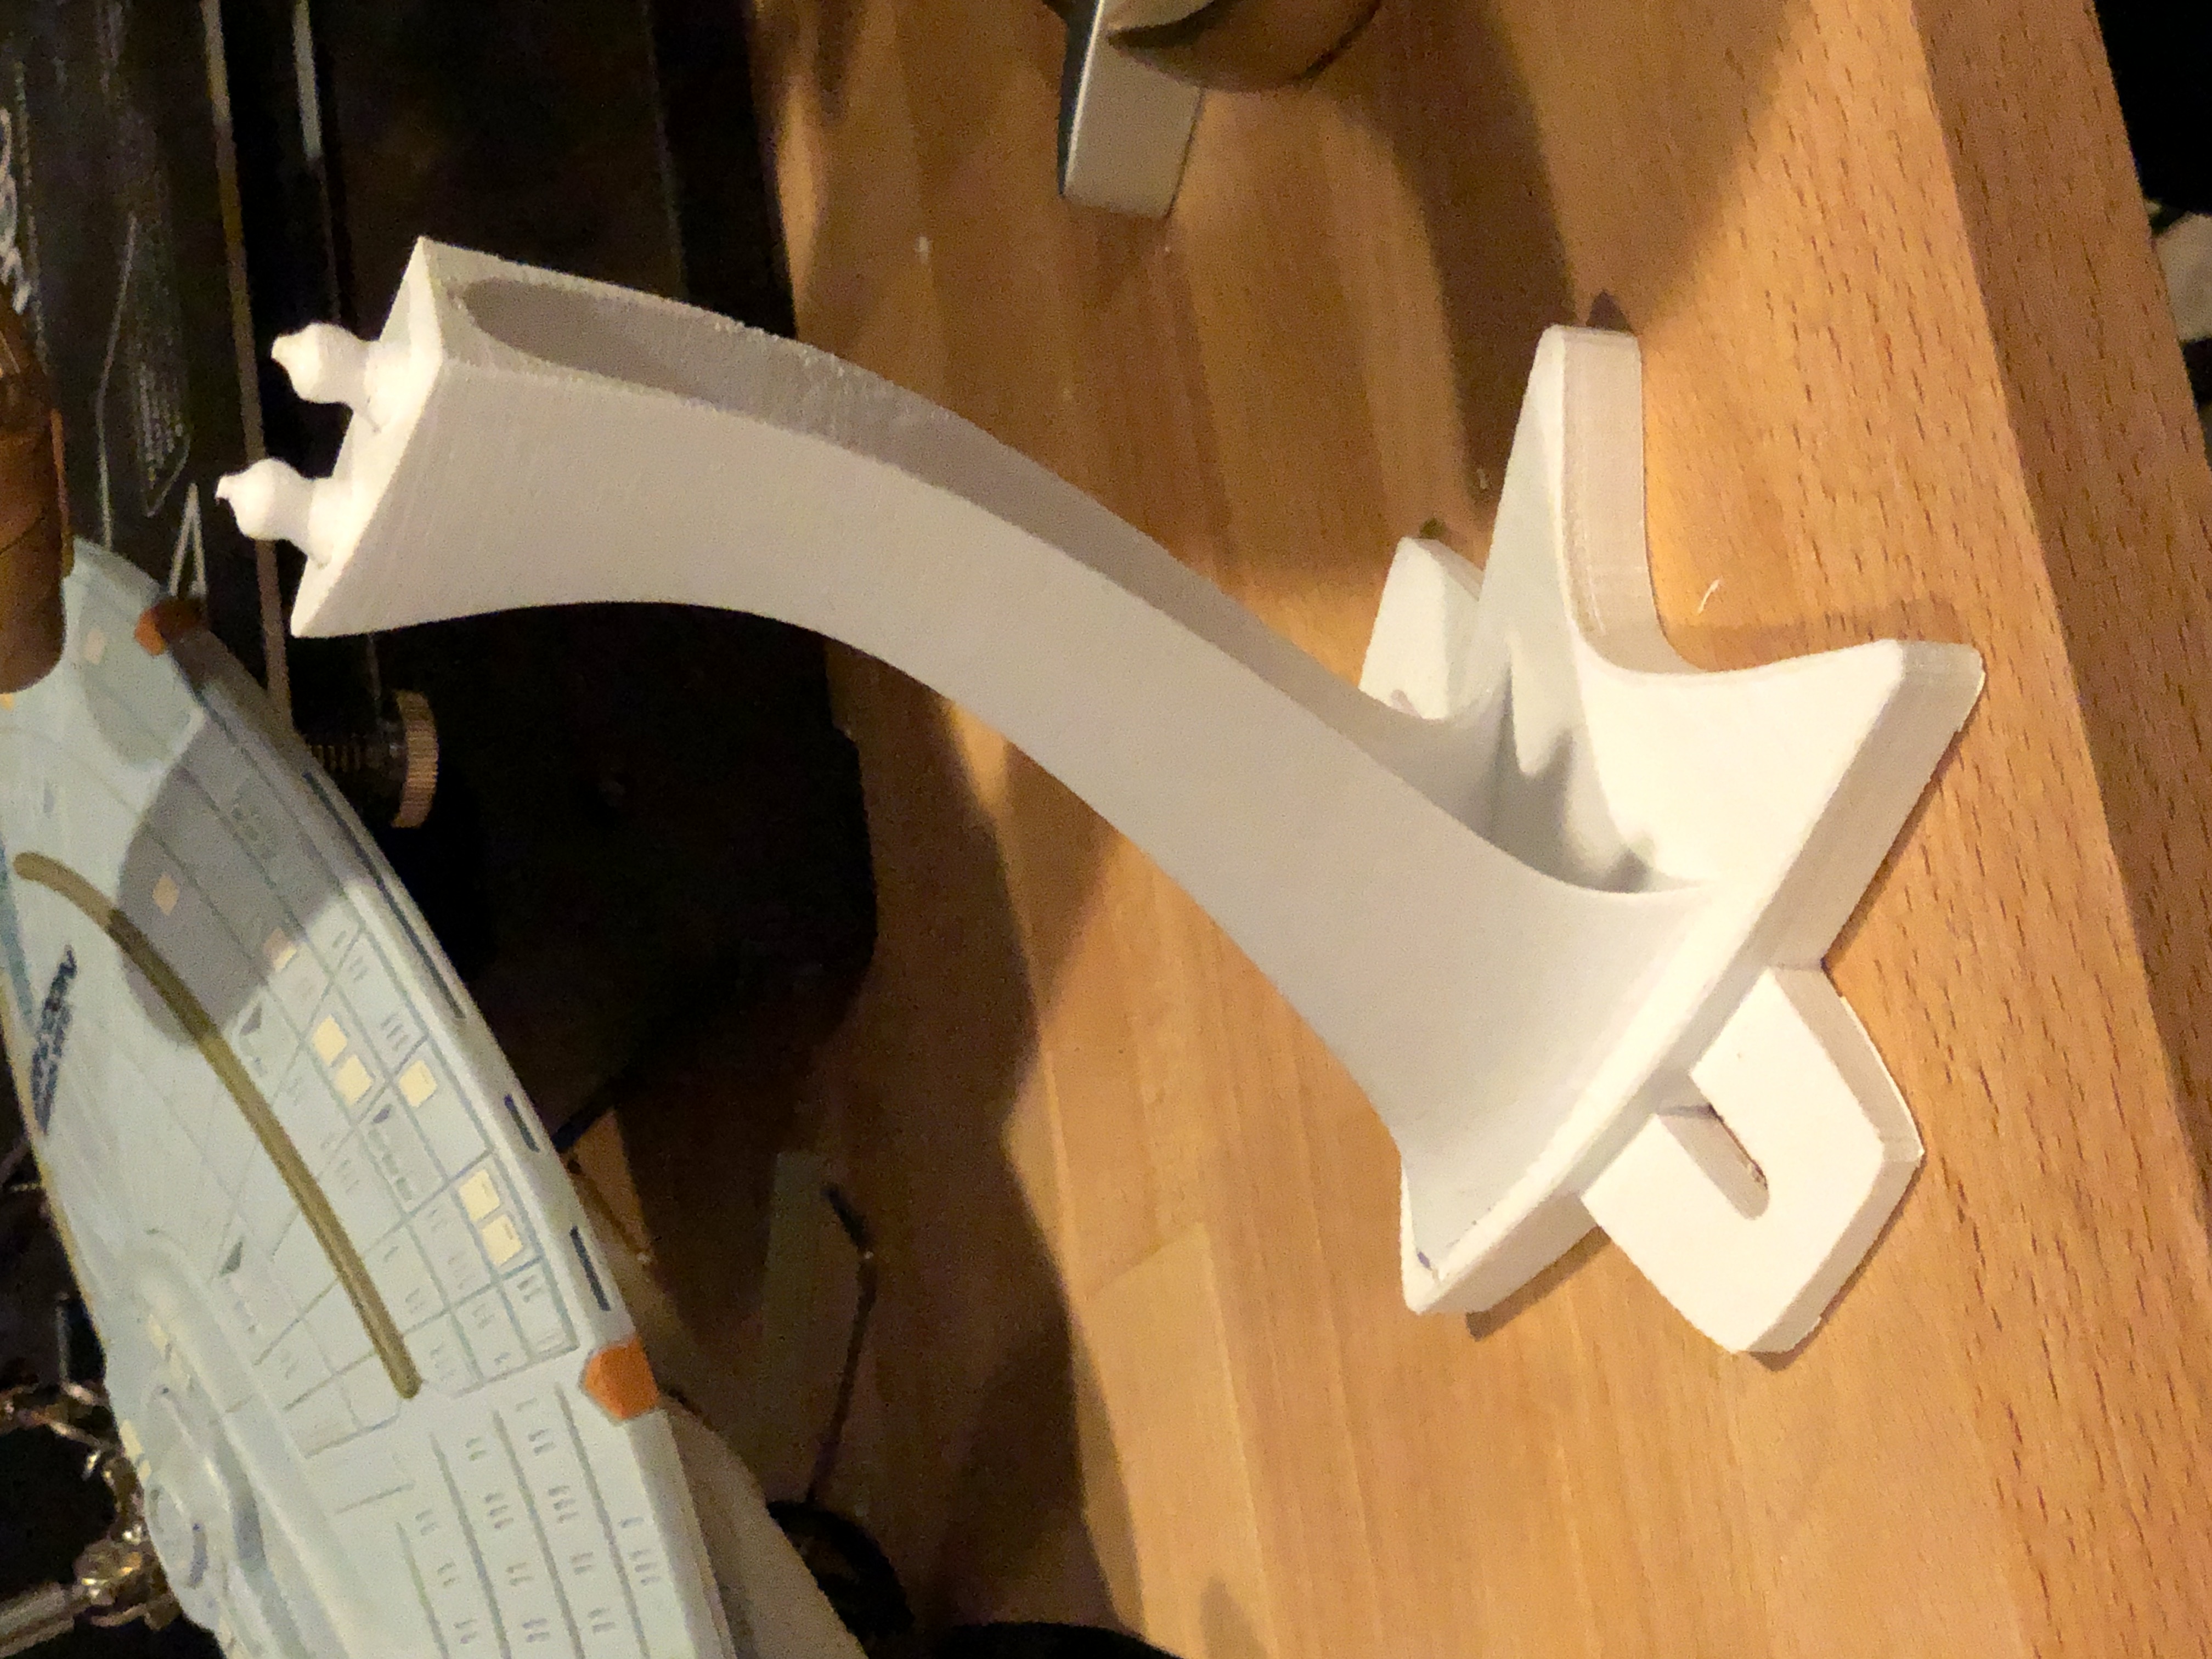 Star Trek - Playmates Voyager Replacement Stand